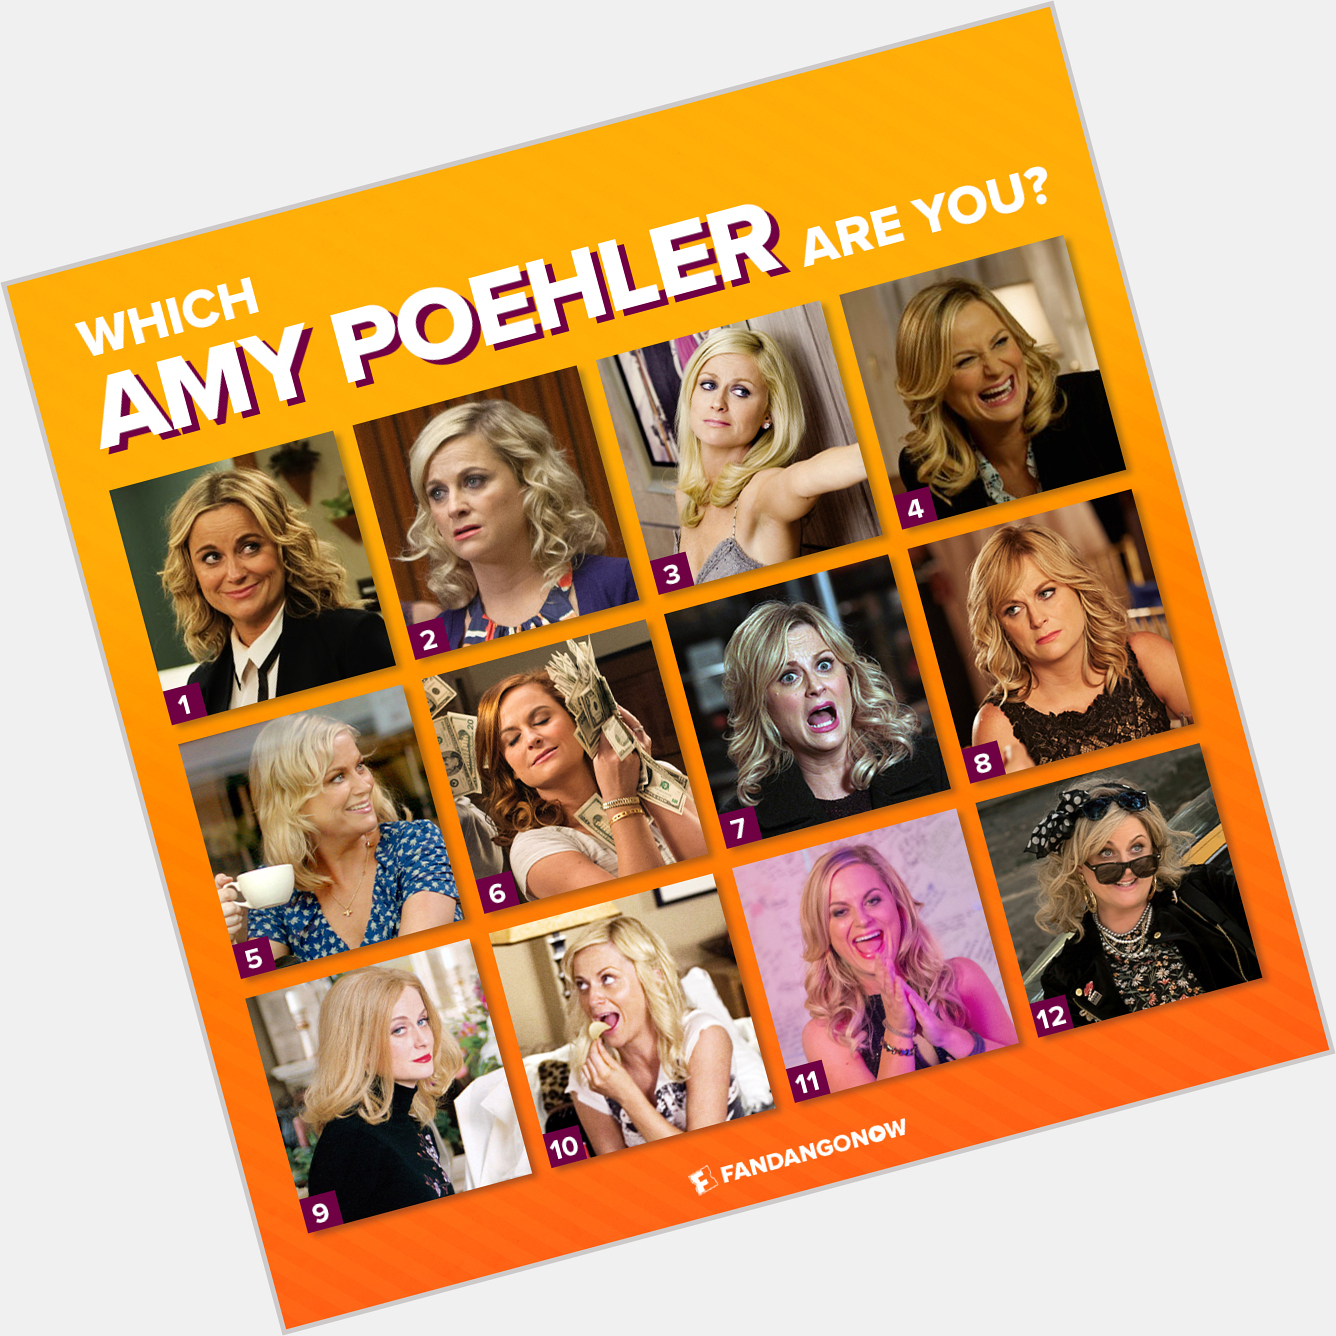 Happy Birthday to Amy Poehler! Which Poehler are you feeling like today? 